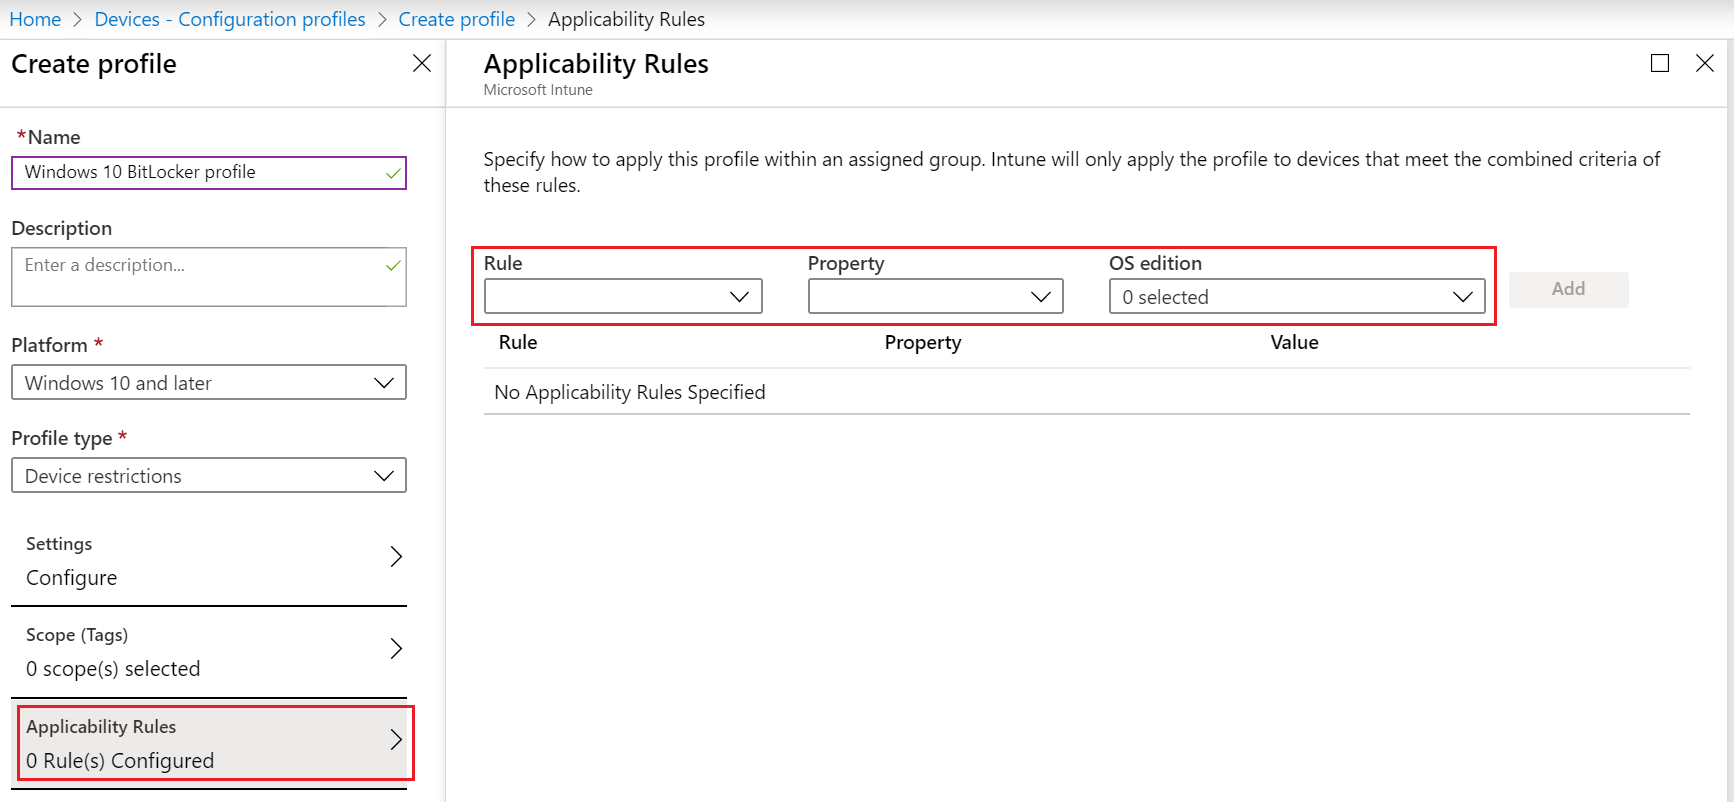 Screenshot that shows how to add an applicability rule to a Windows 10 device configuration profile in Microsoft Intune.